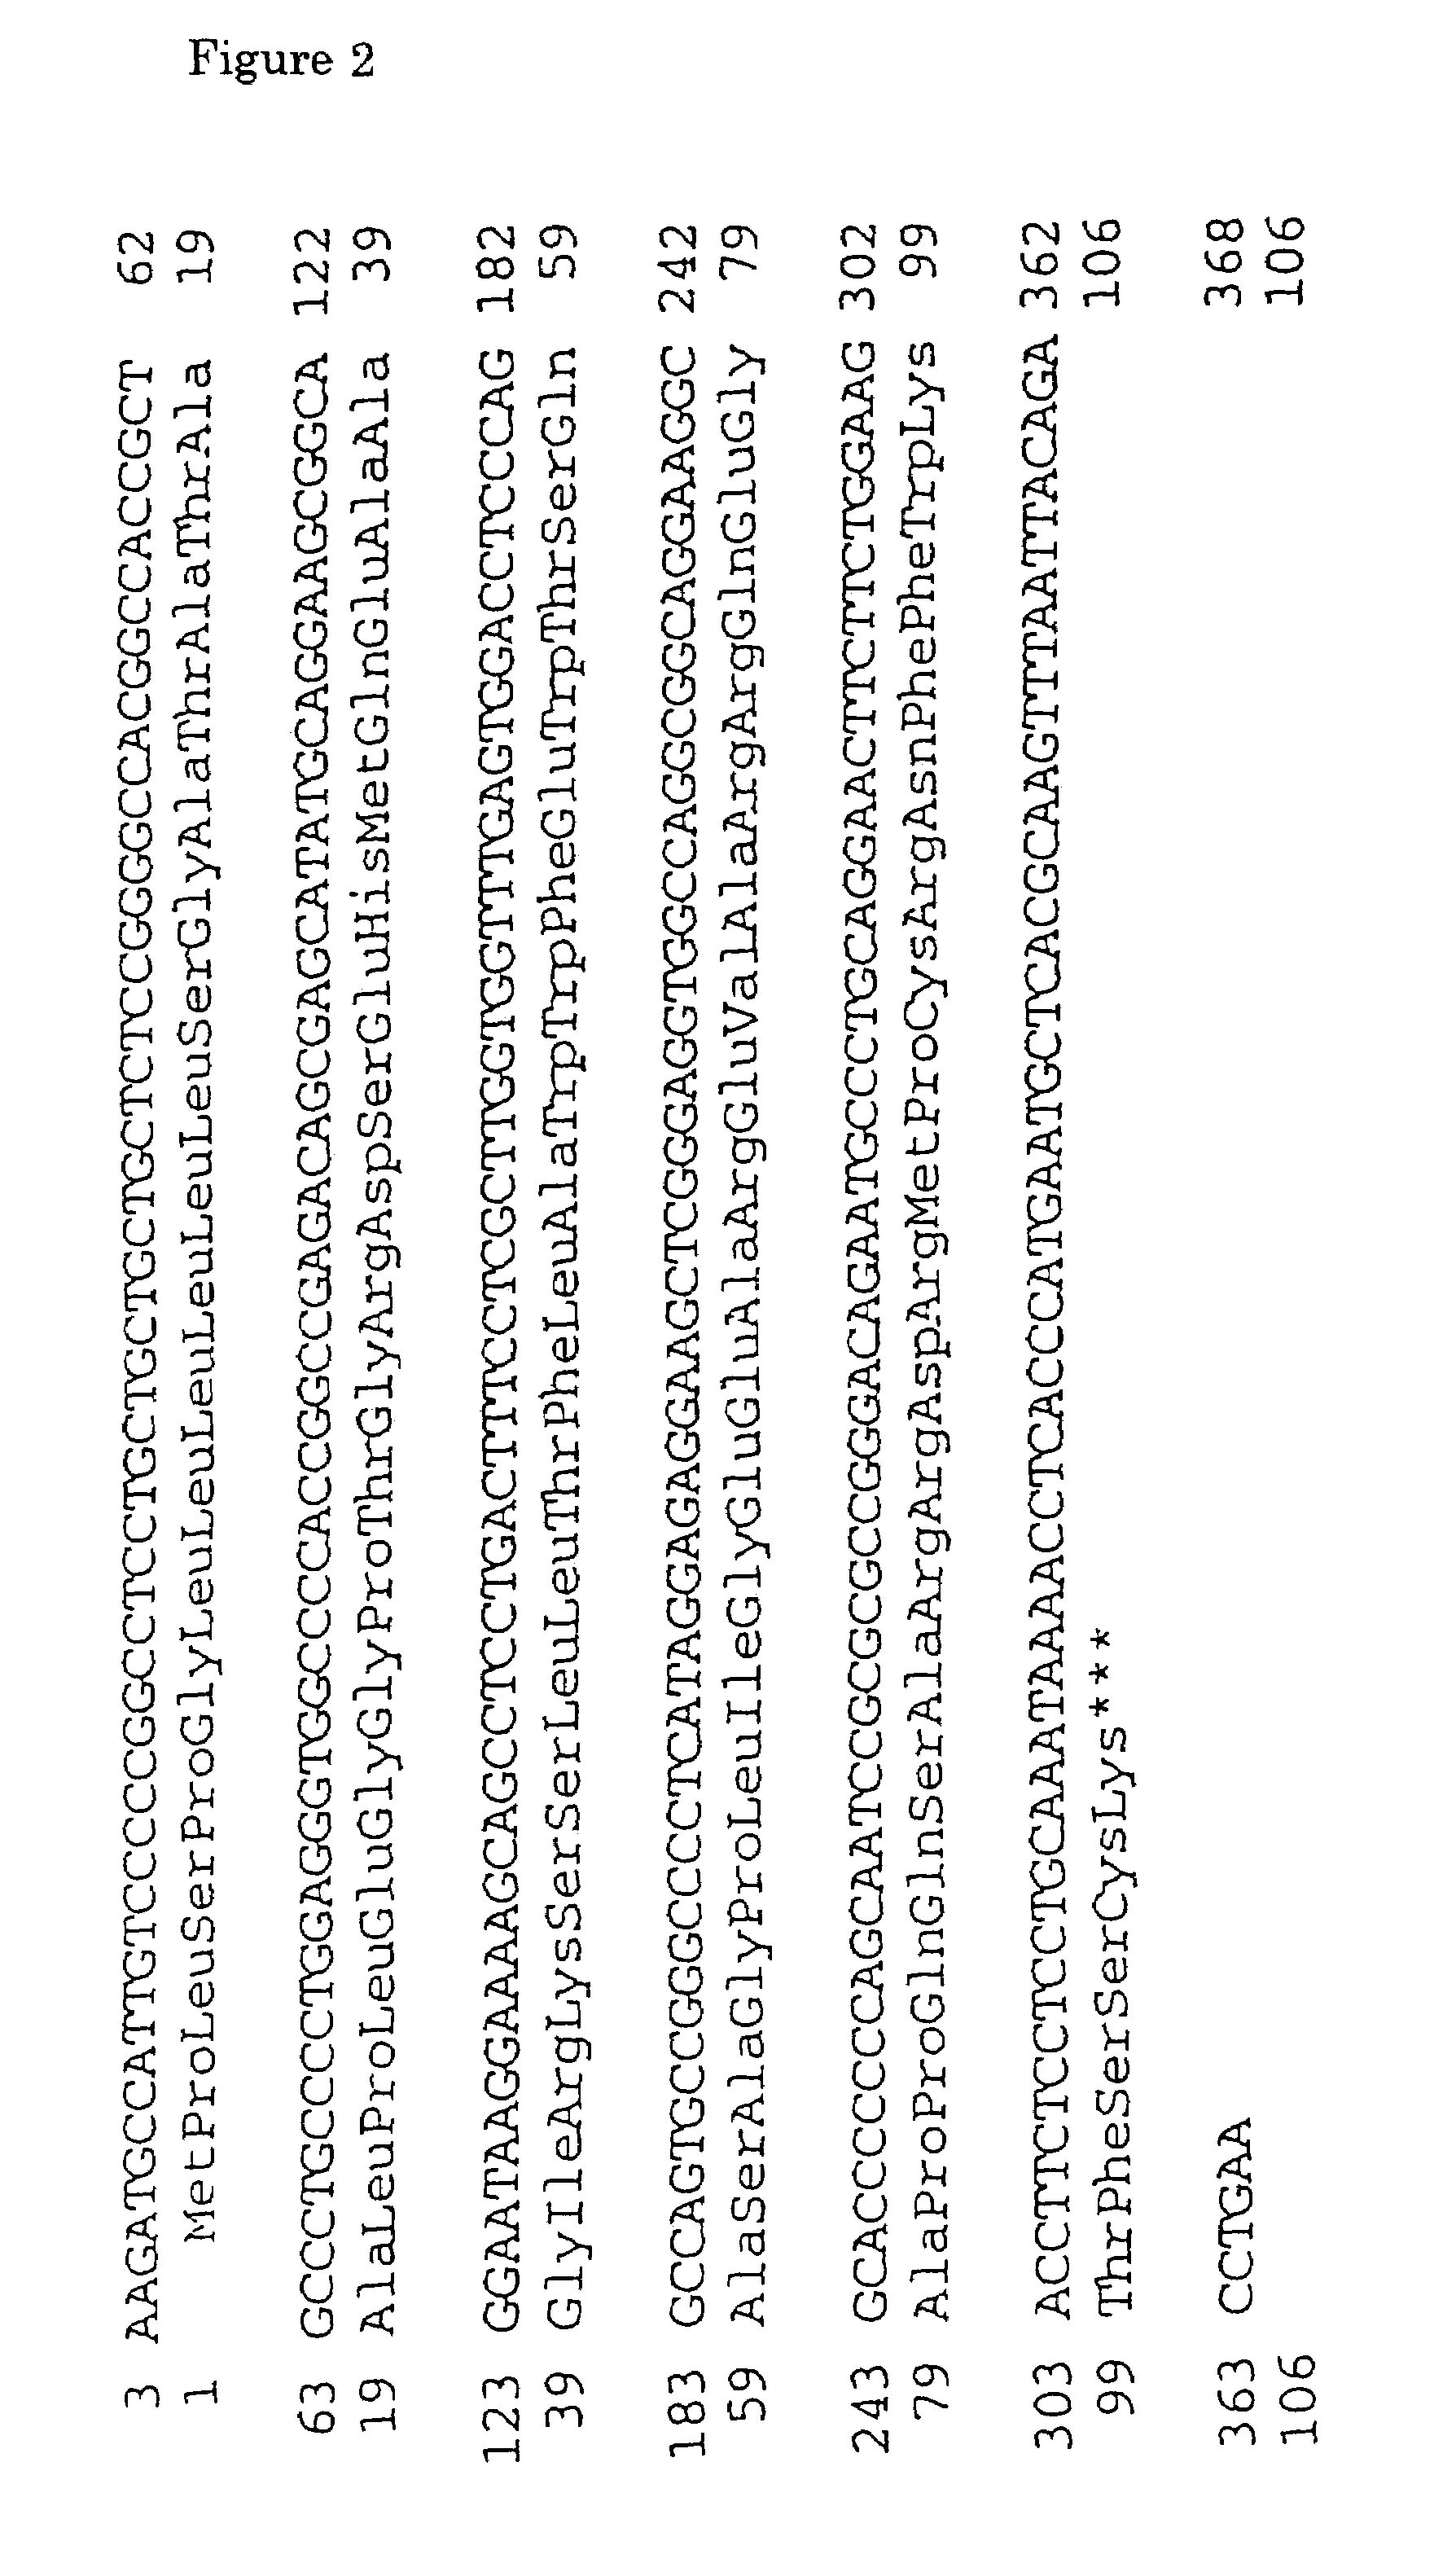 Peptides and production and use thereof